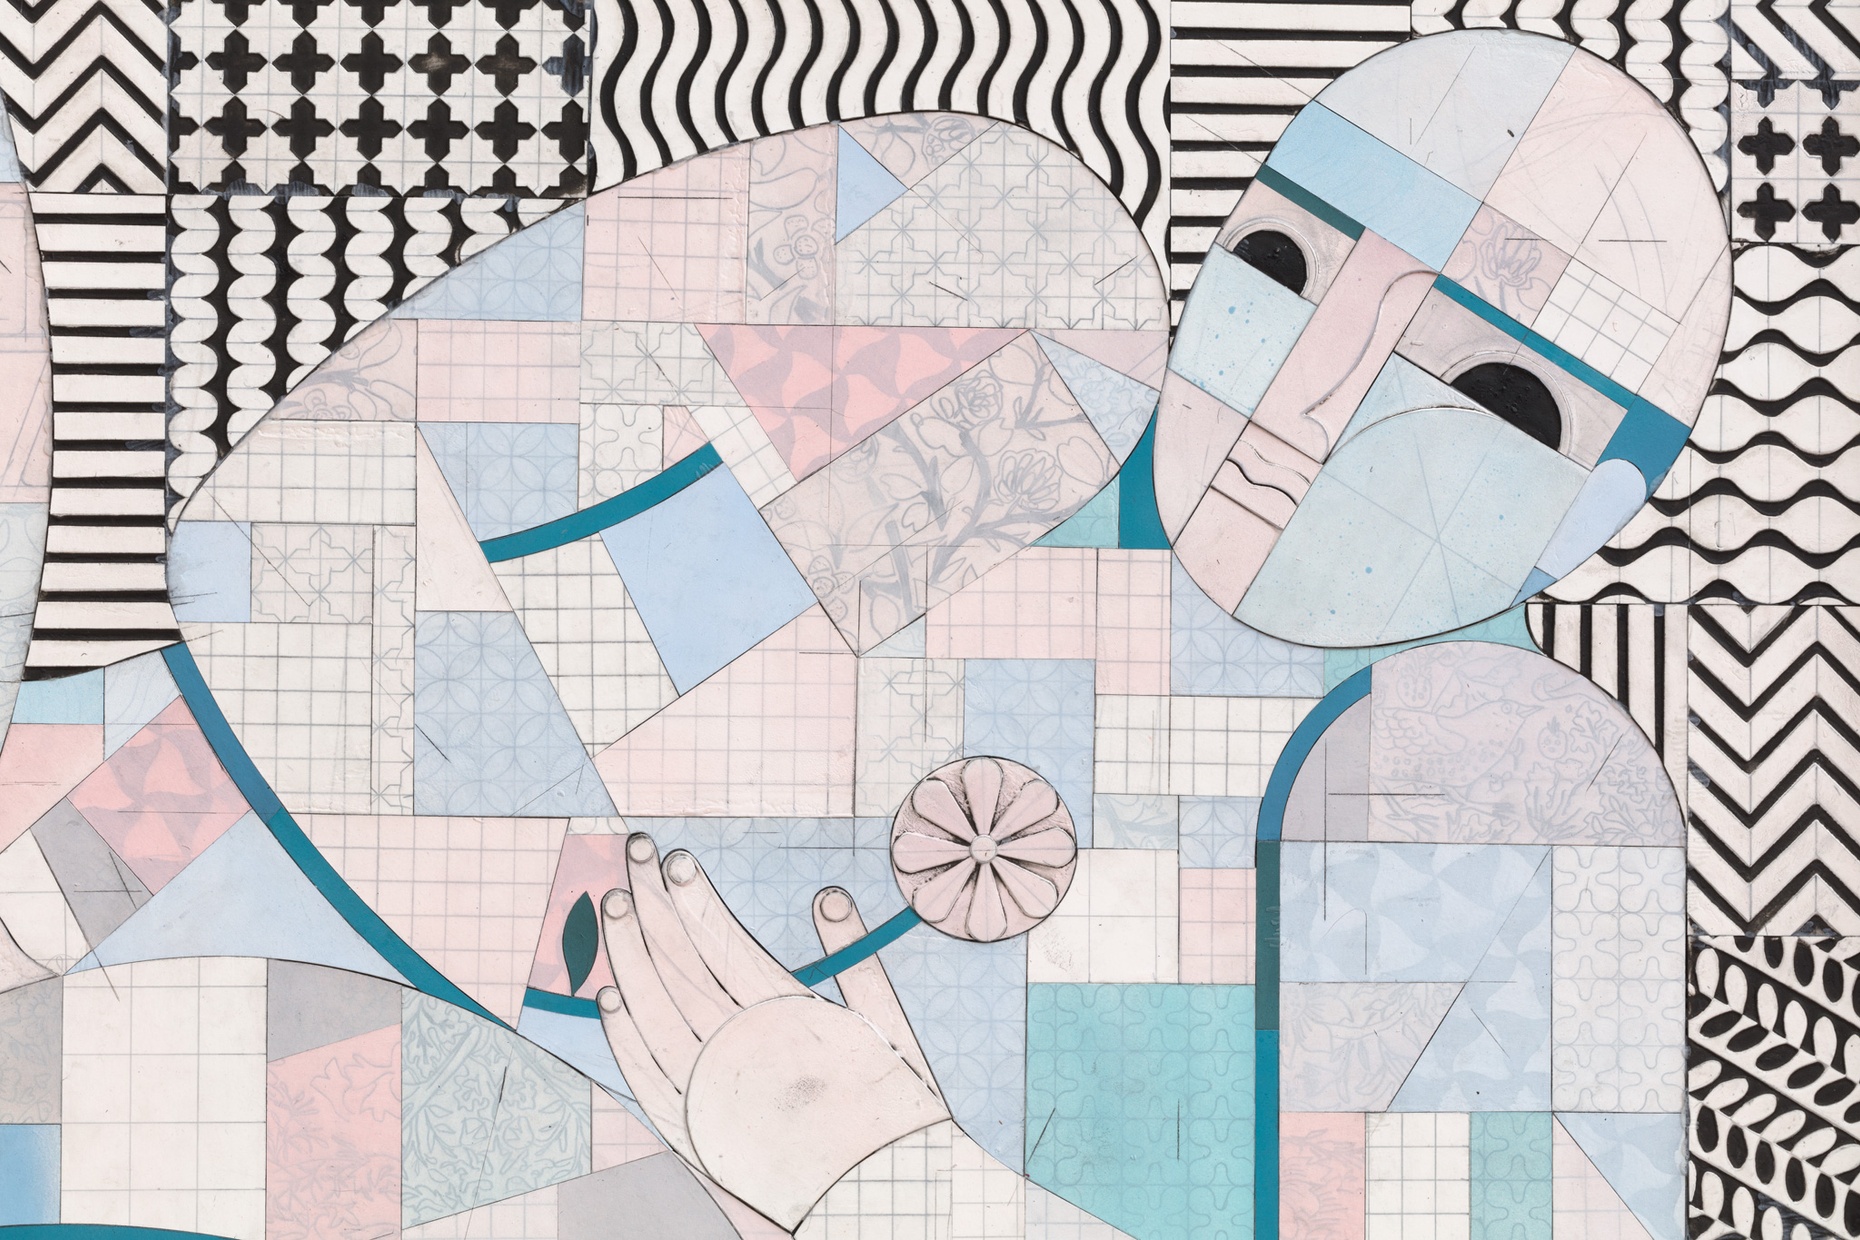 A pastel-colored, abstract male figure holding a flower reclines against a background of black and white geometric pattern.